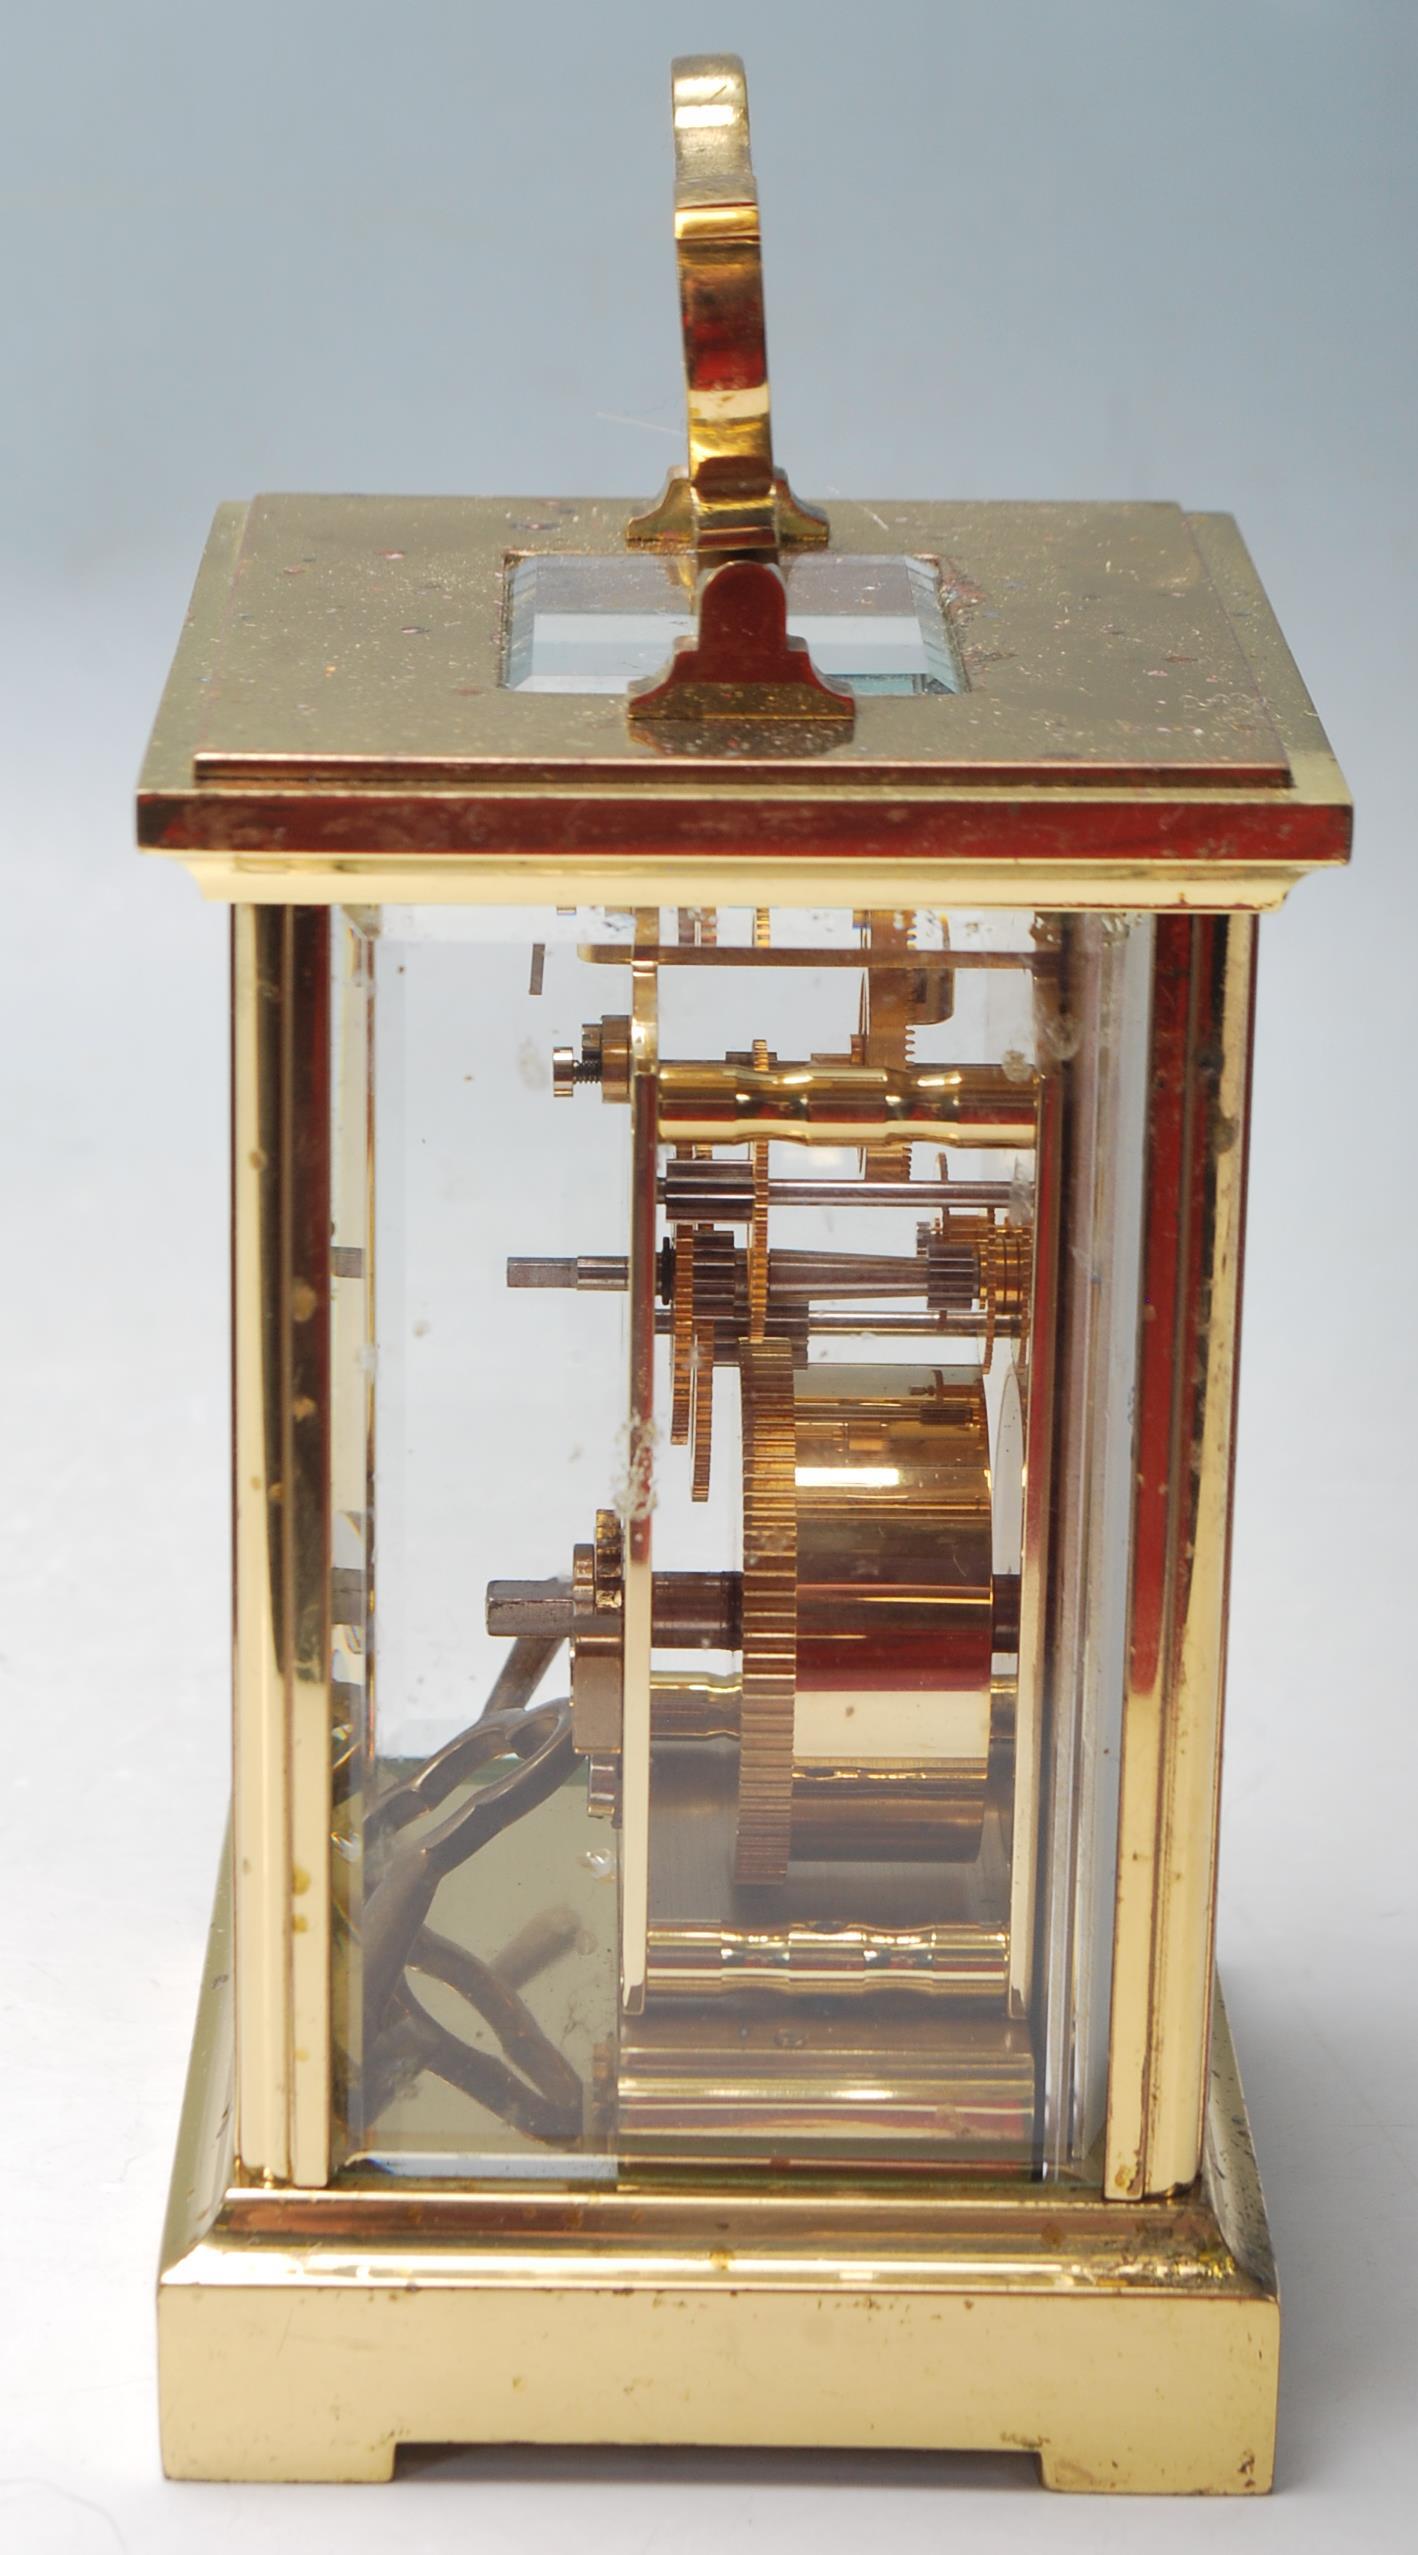 TAYLOR & BLIGH BRASS CASED CARRIAGE CLOCK - Image 2 of 6